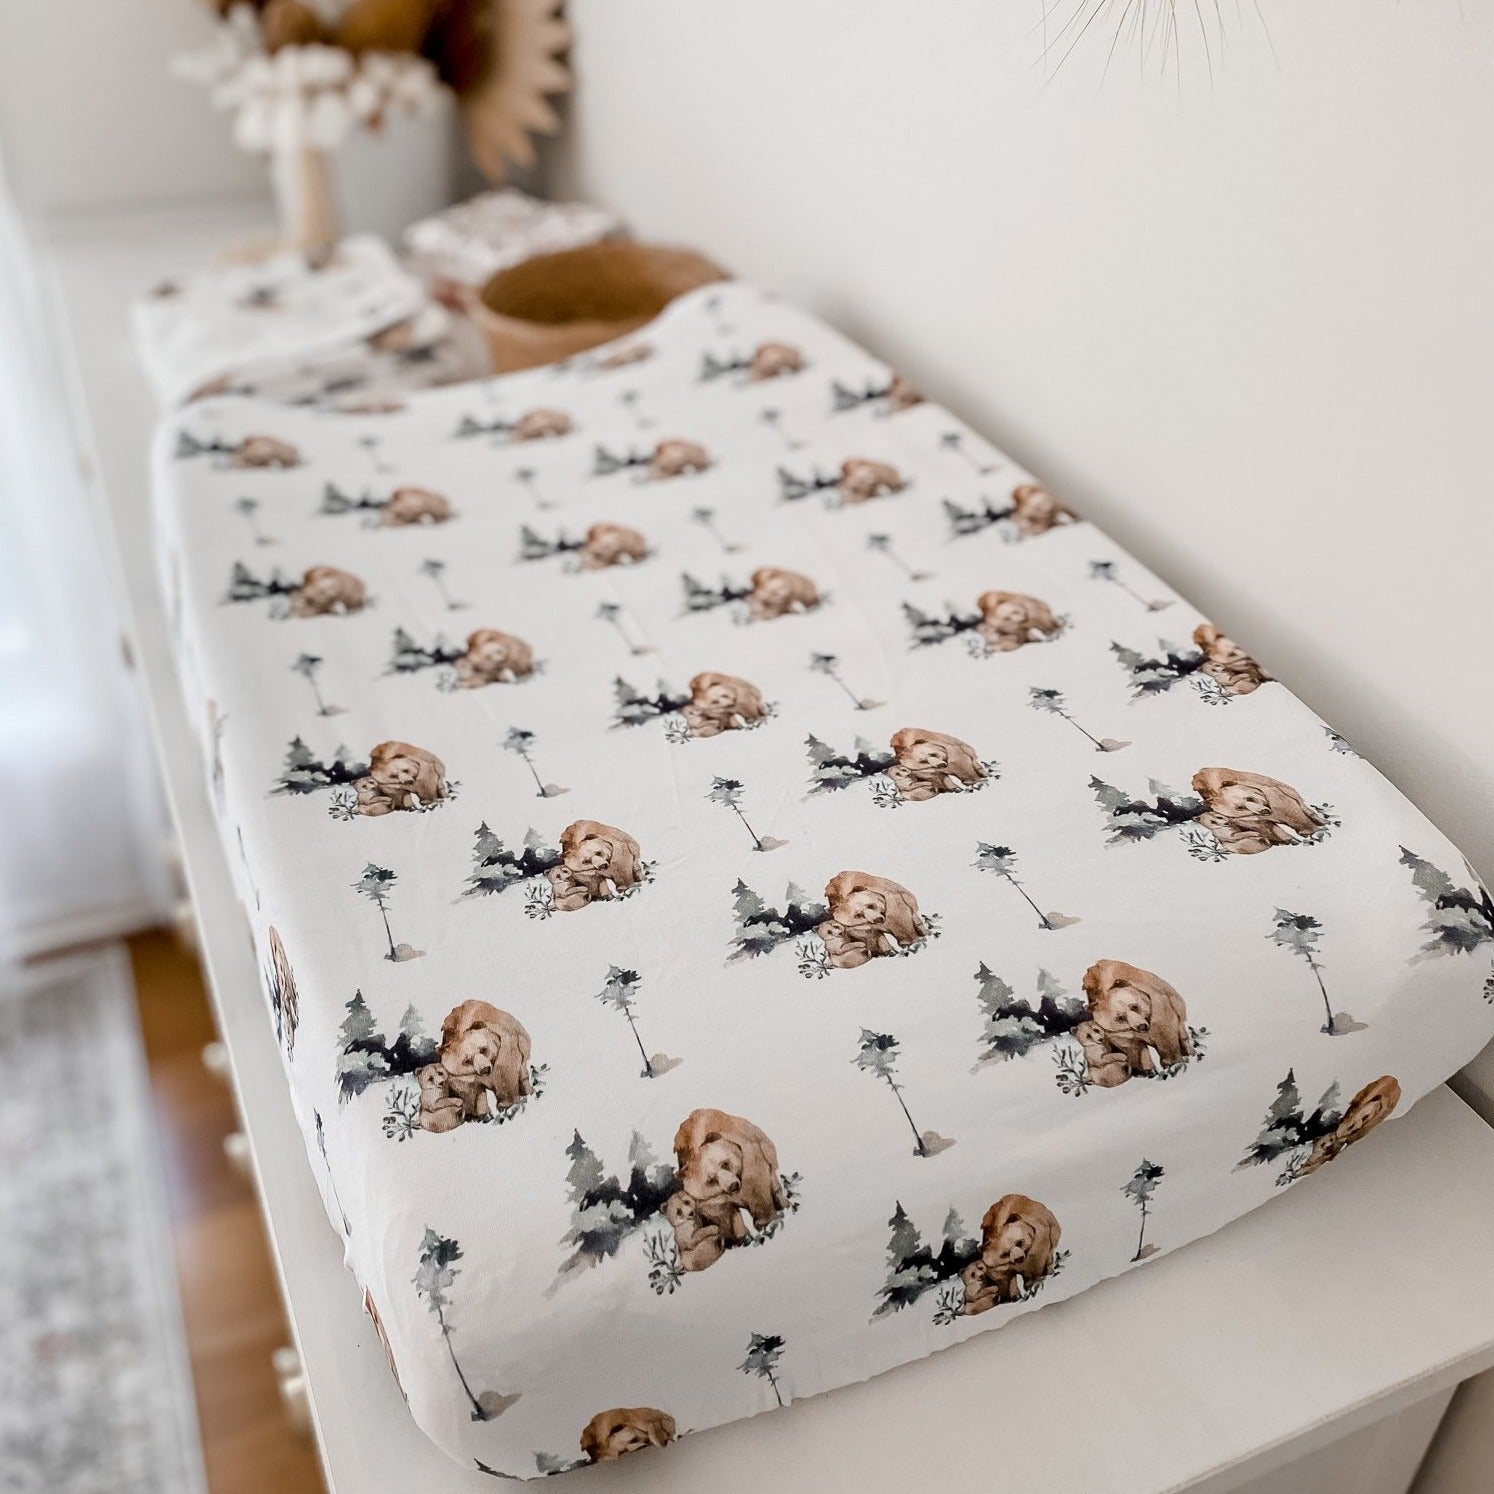 Grizzly Bassinet Sheet / Change Pad Cover